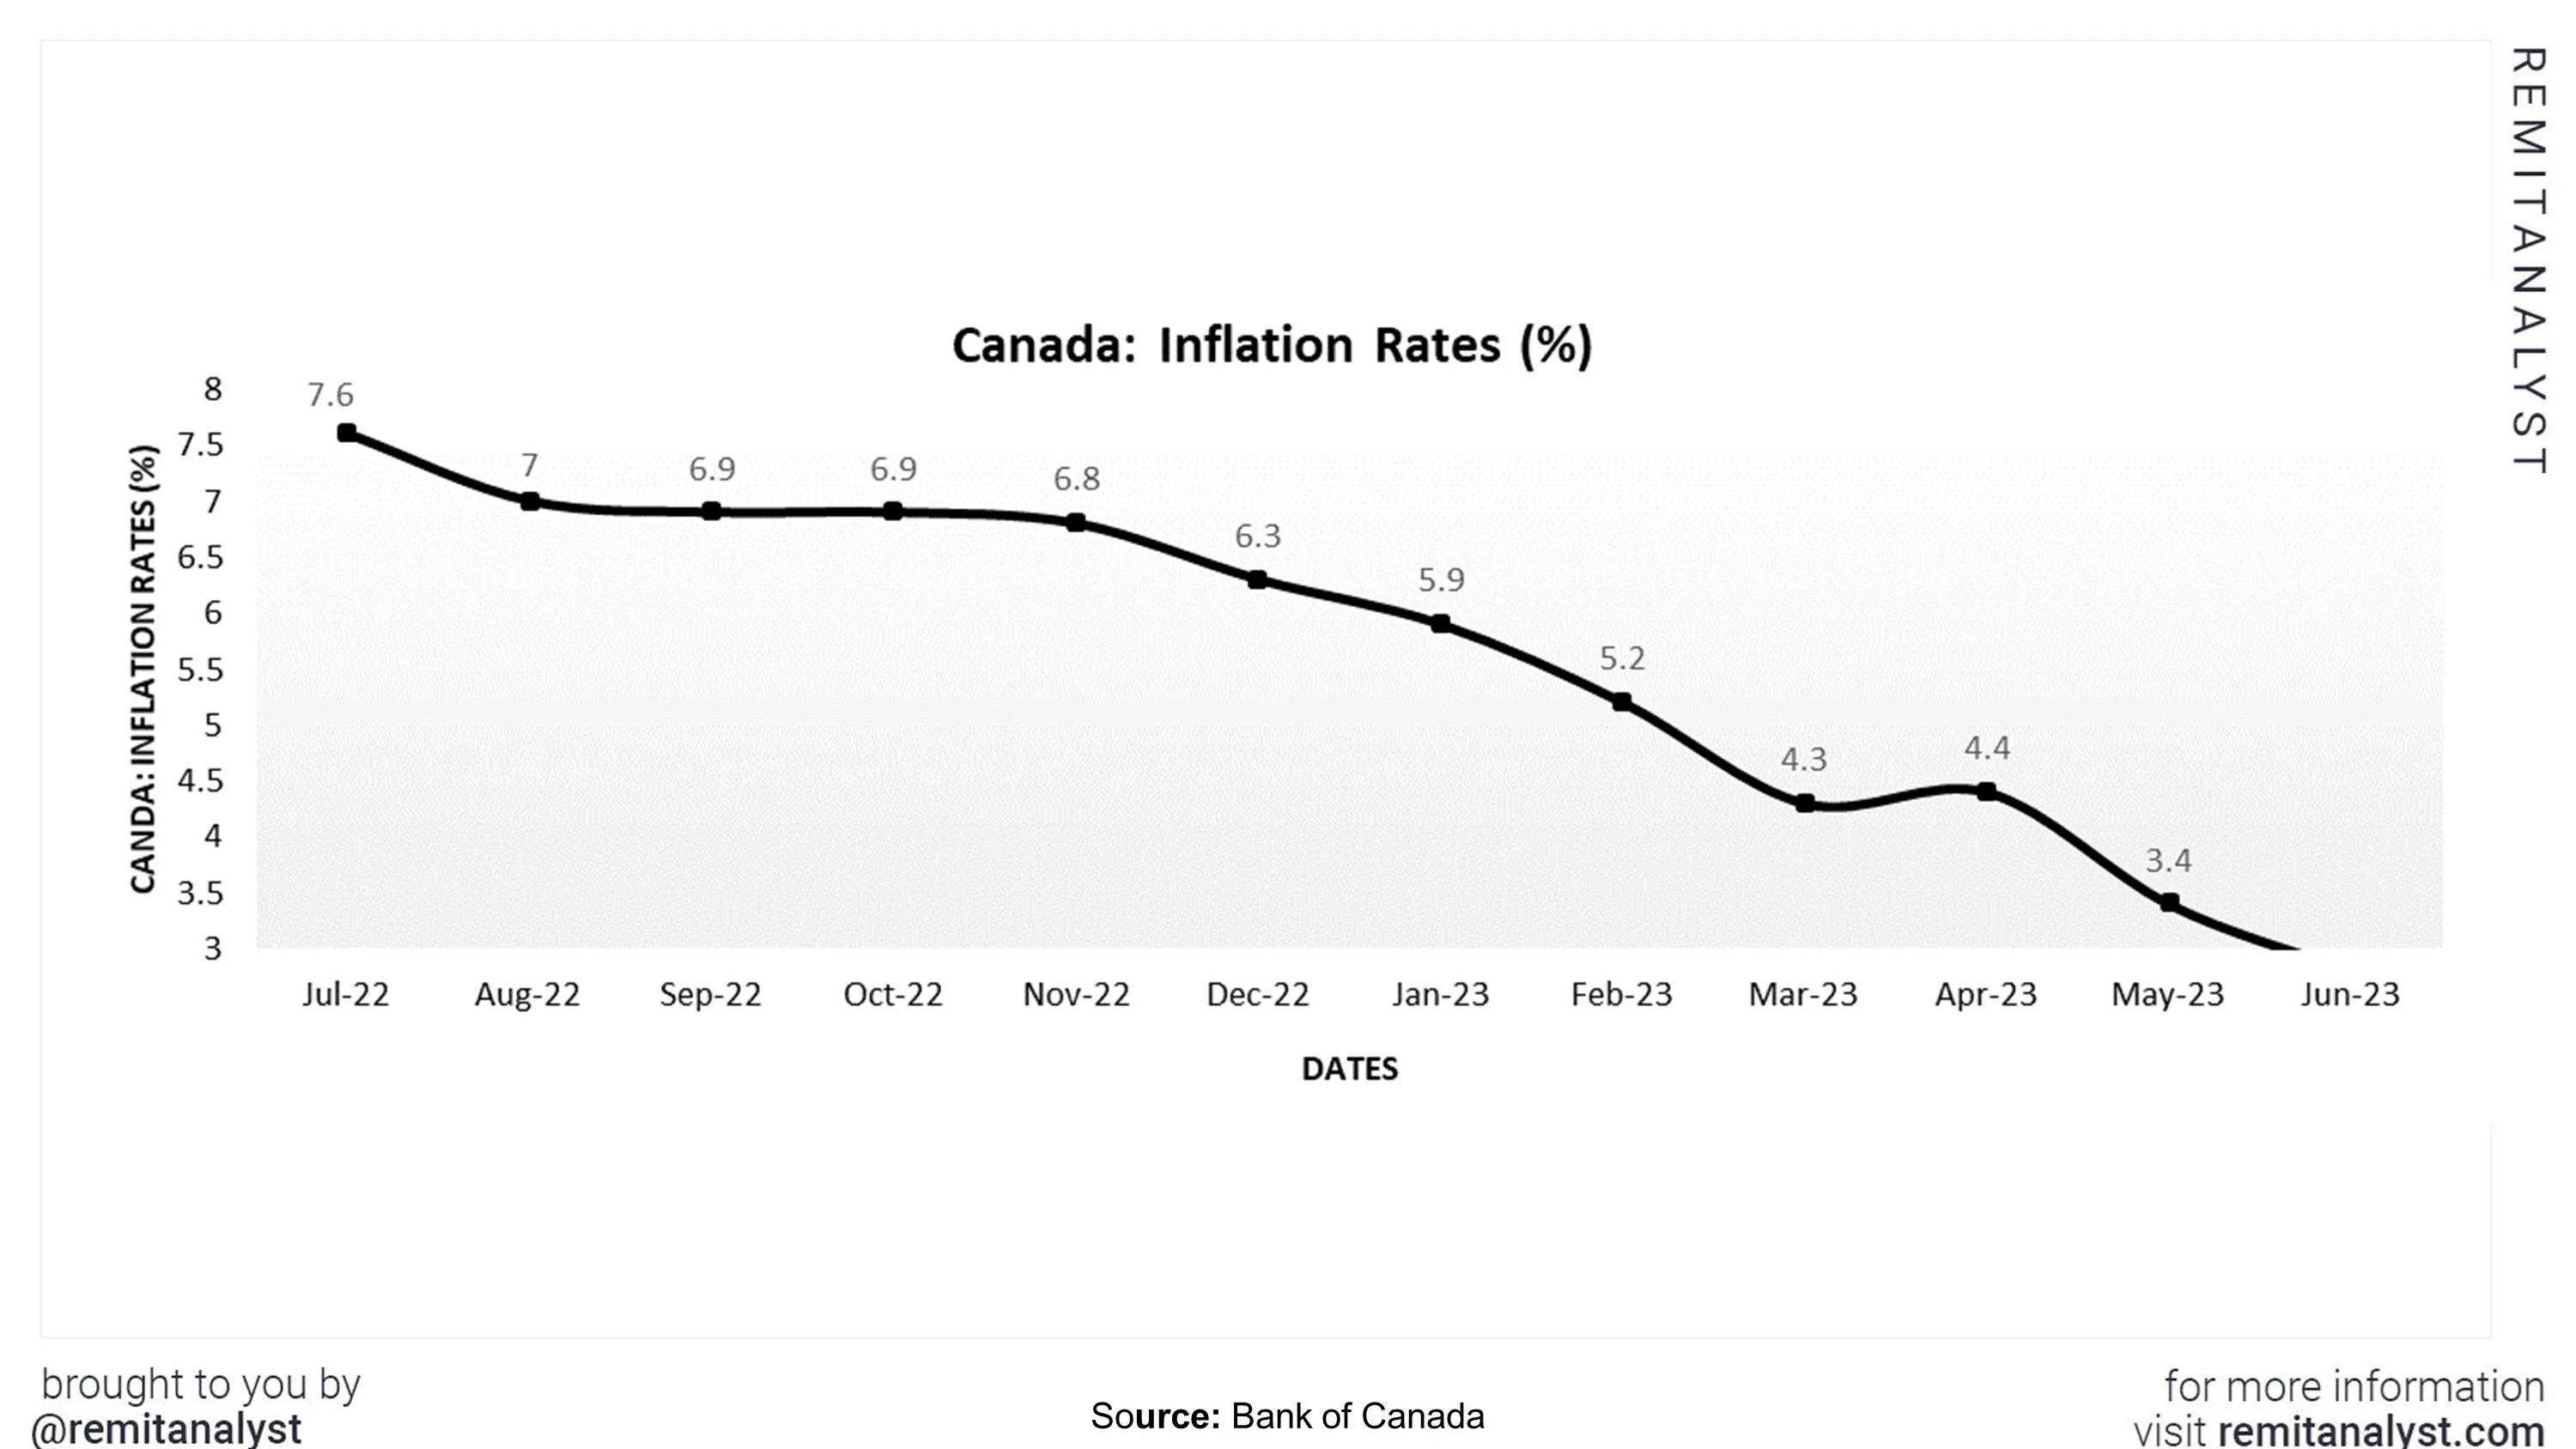 inflation-rates-canada-from-jul-2022-to-jun-2023